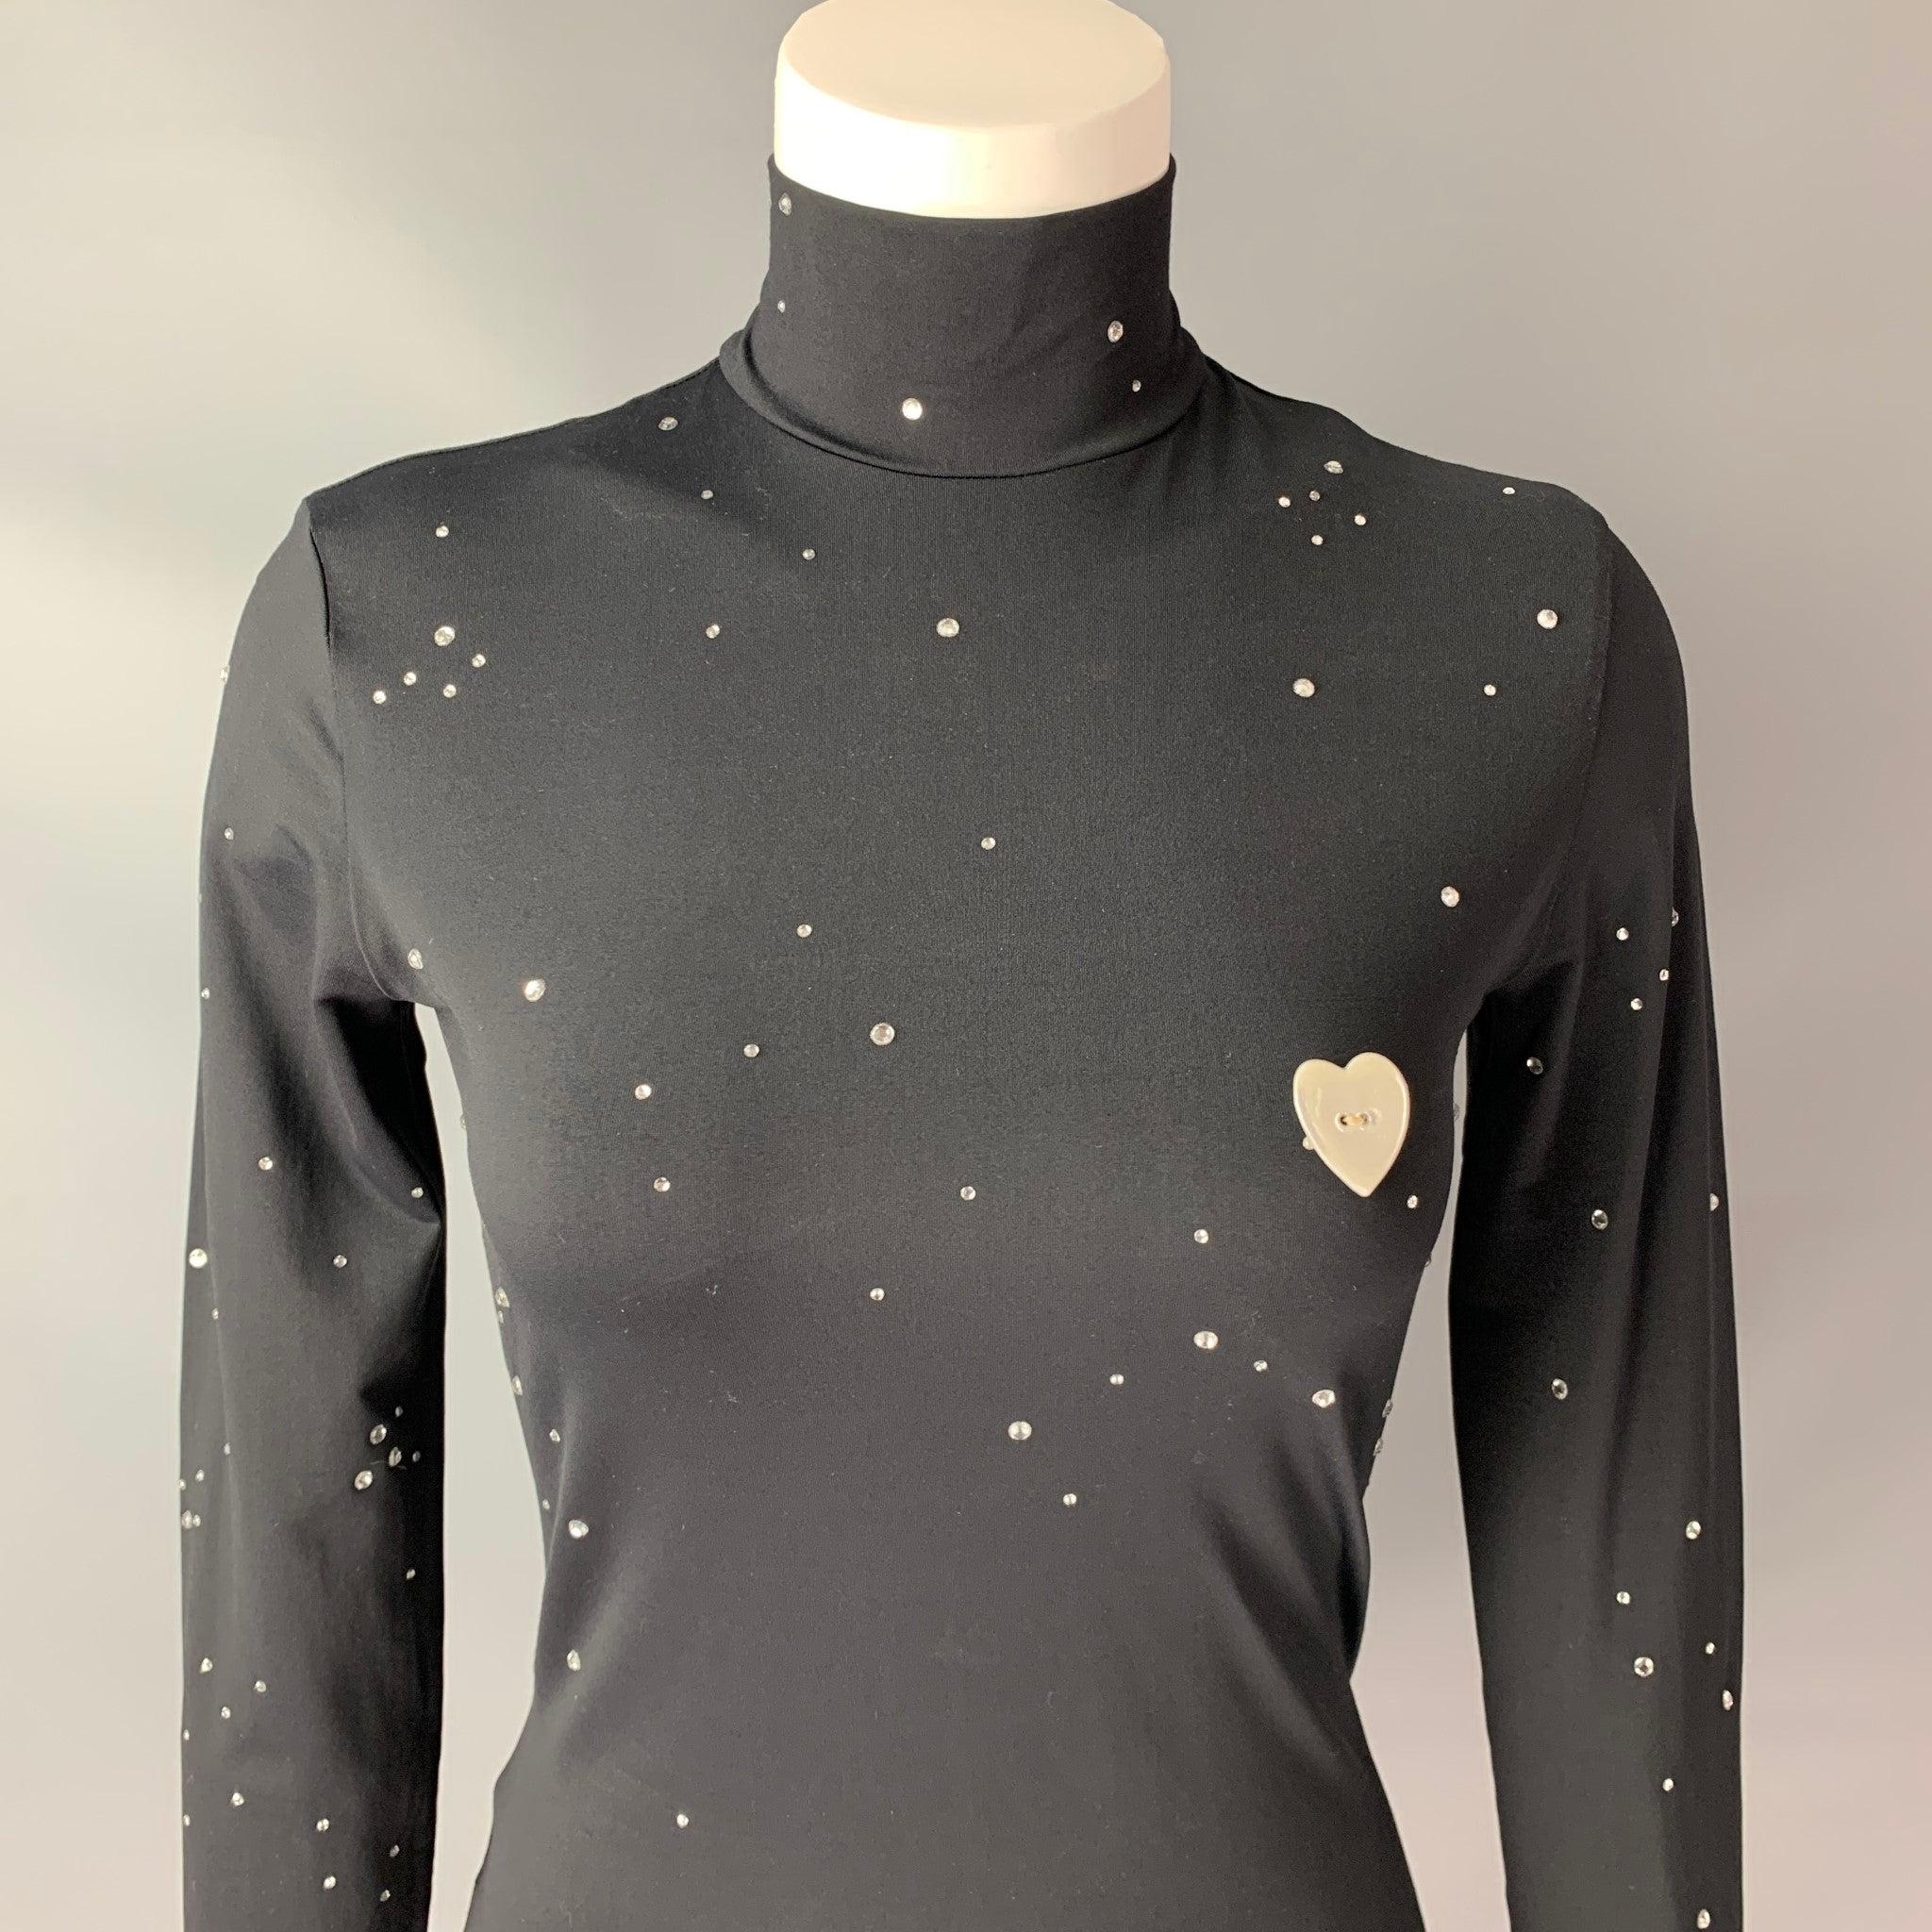 MOSCHINO Cheep and Chic top comes in black Polyamide / Elastane fabric features an embroidered girl, rhinestones and heart shape button, mock neck, half zipper on the back. Made in Italy.Very Good Pre-Owned Condition. 

Marked:   USA 8, IT 42 